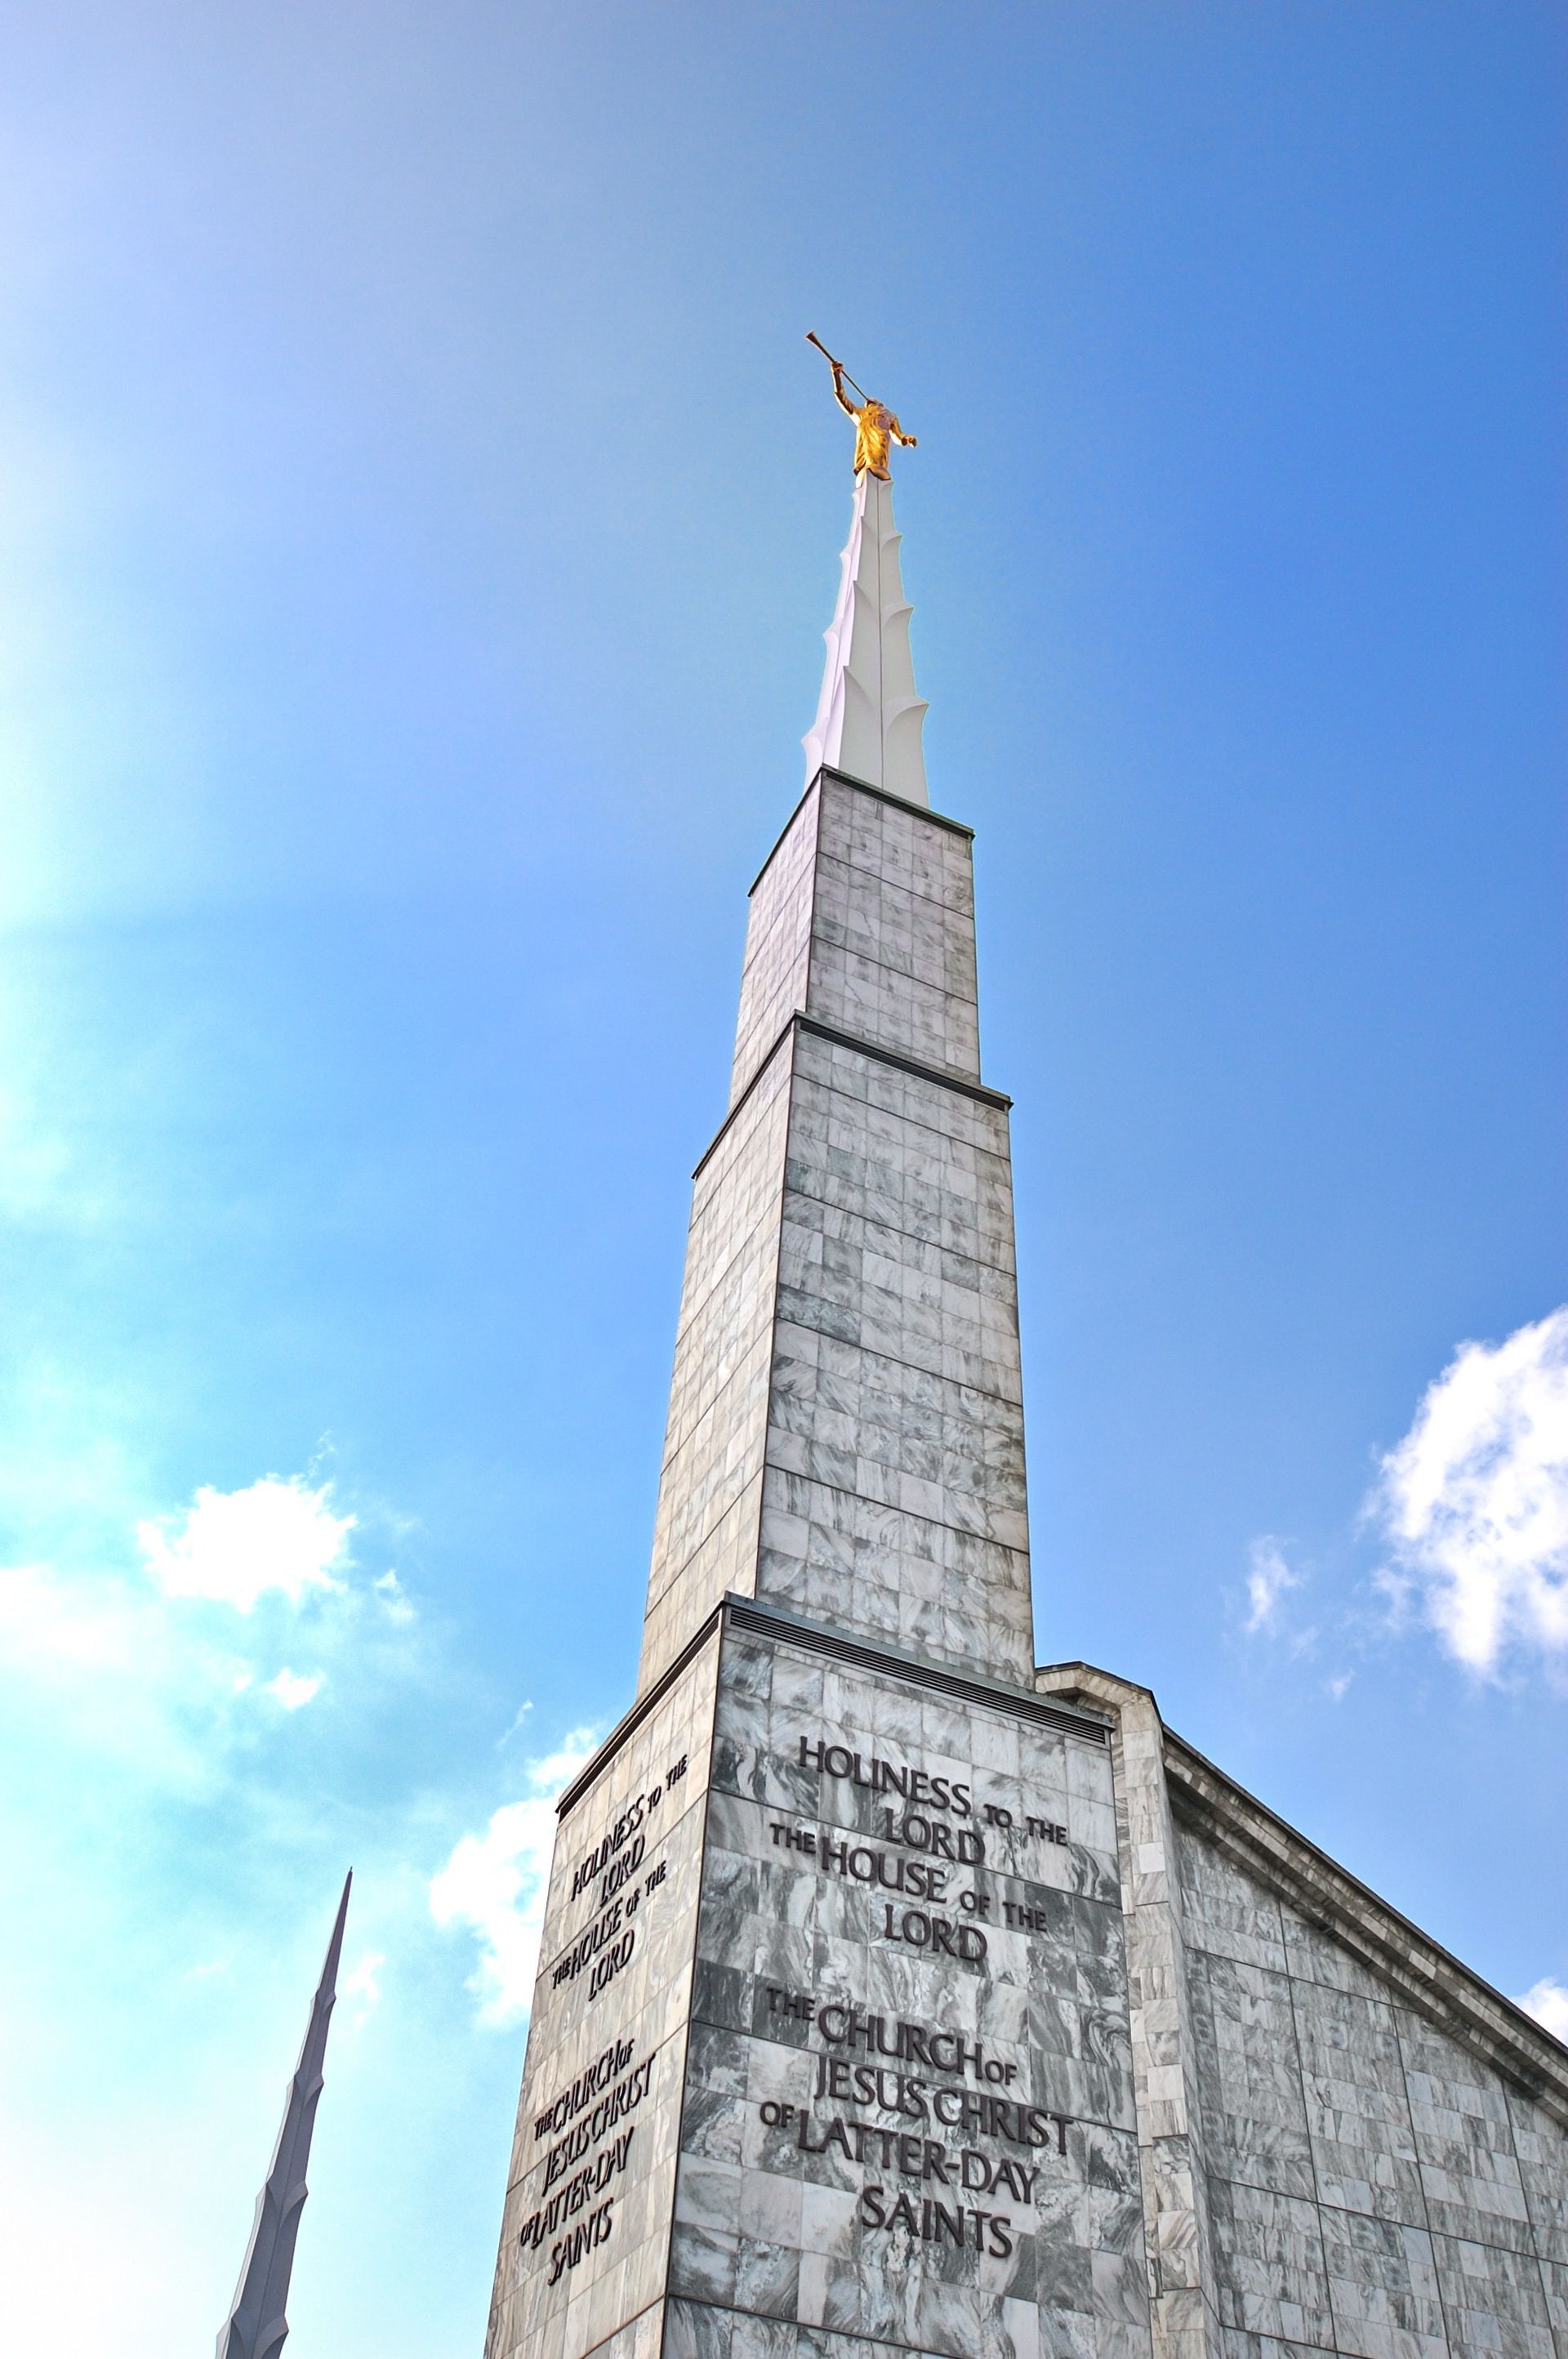 The Dallas Texas Temple spire and name sign.